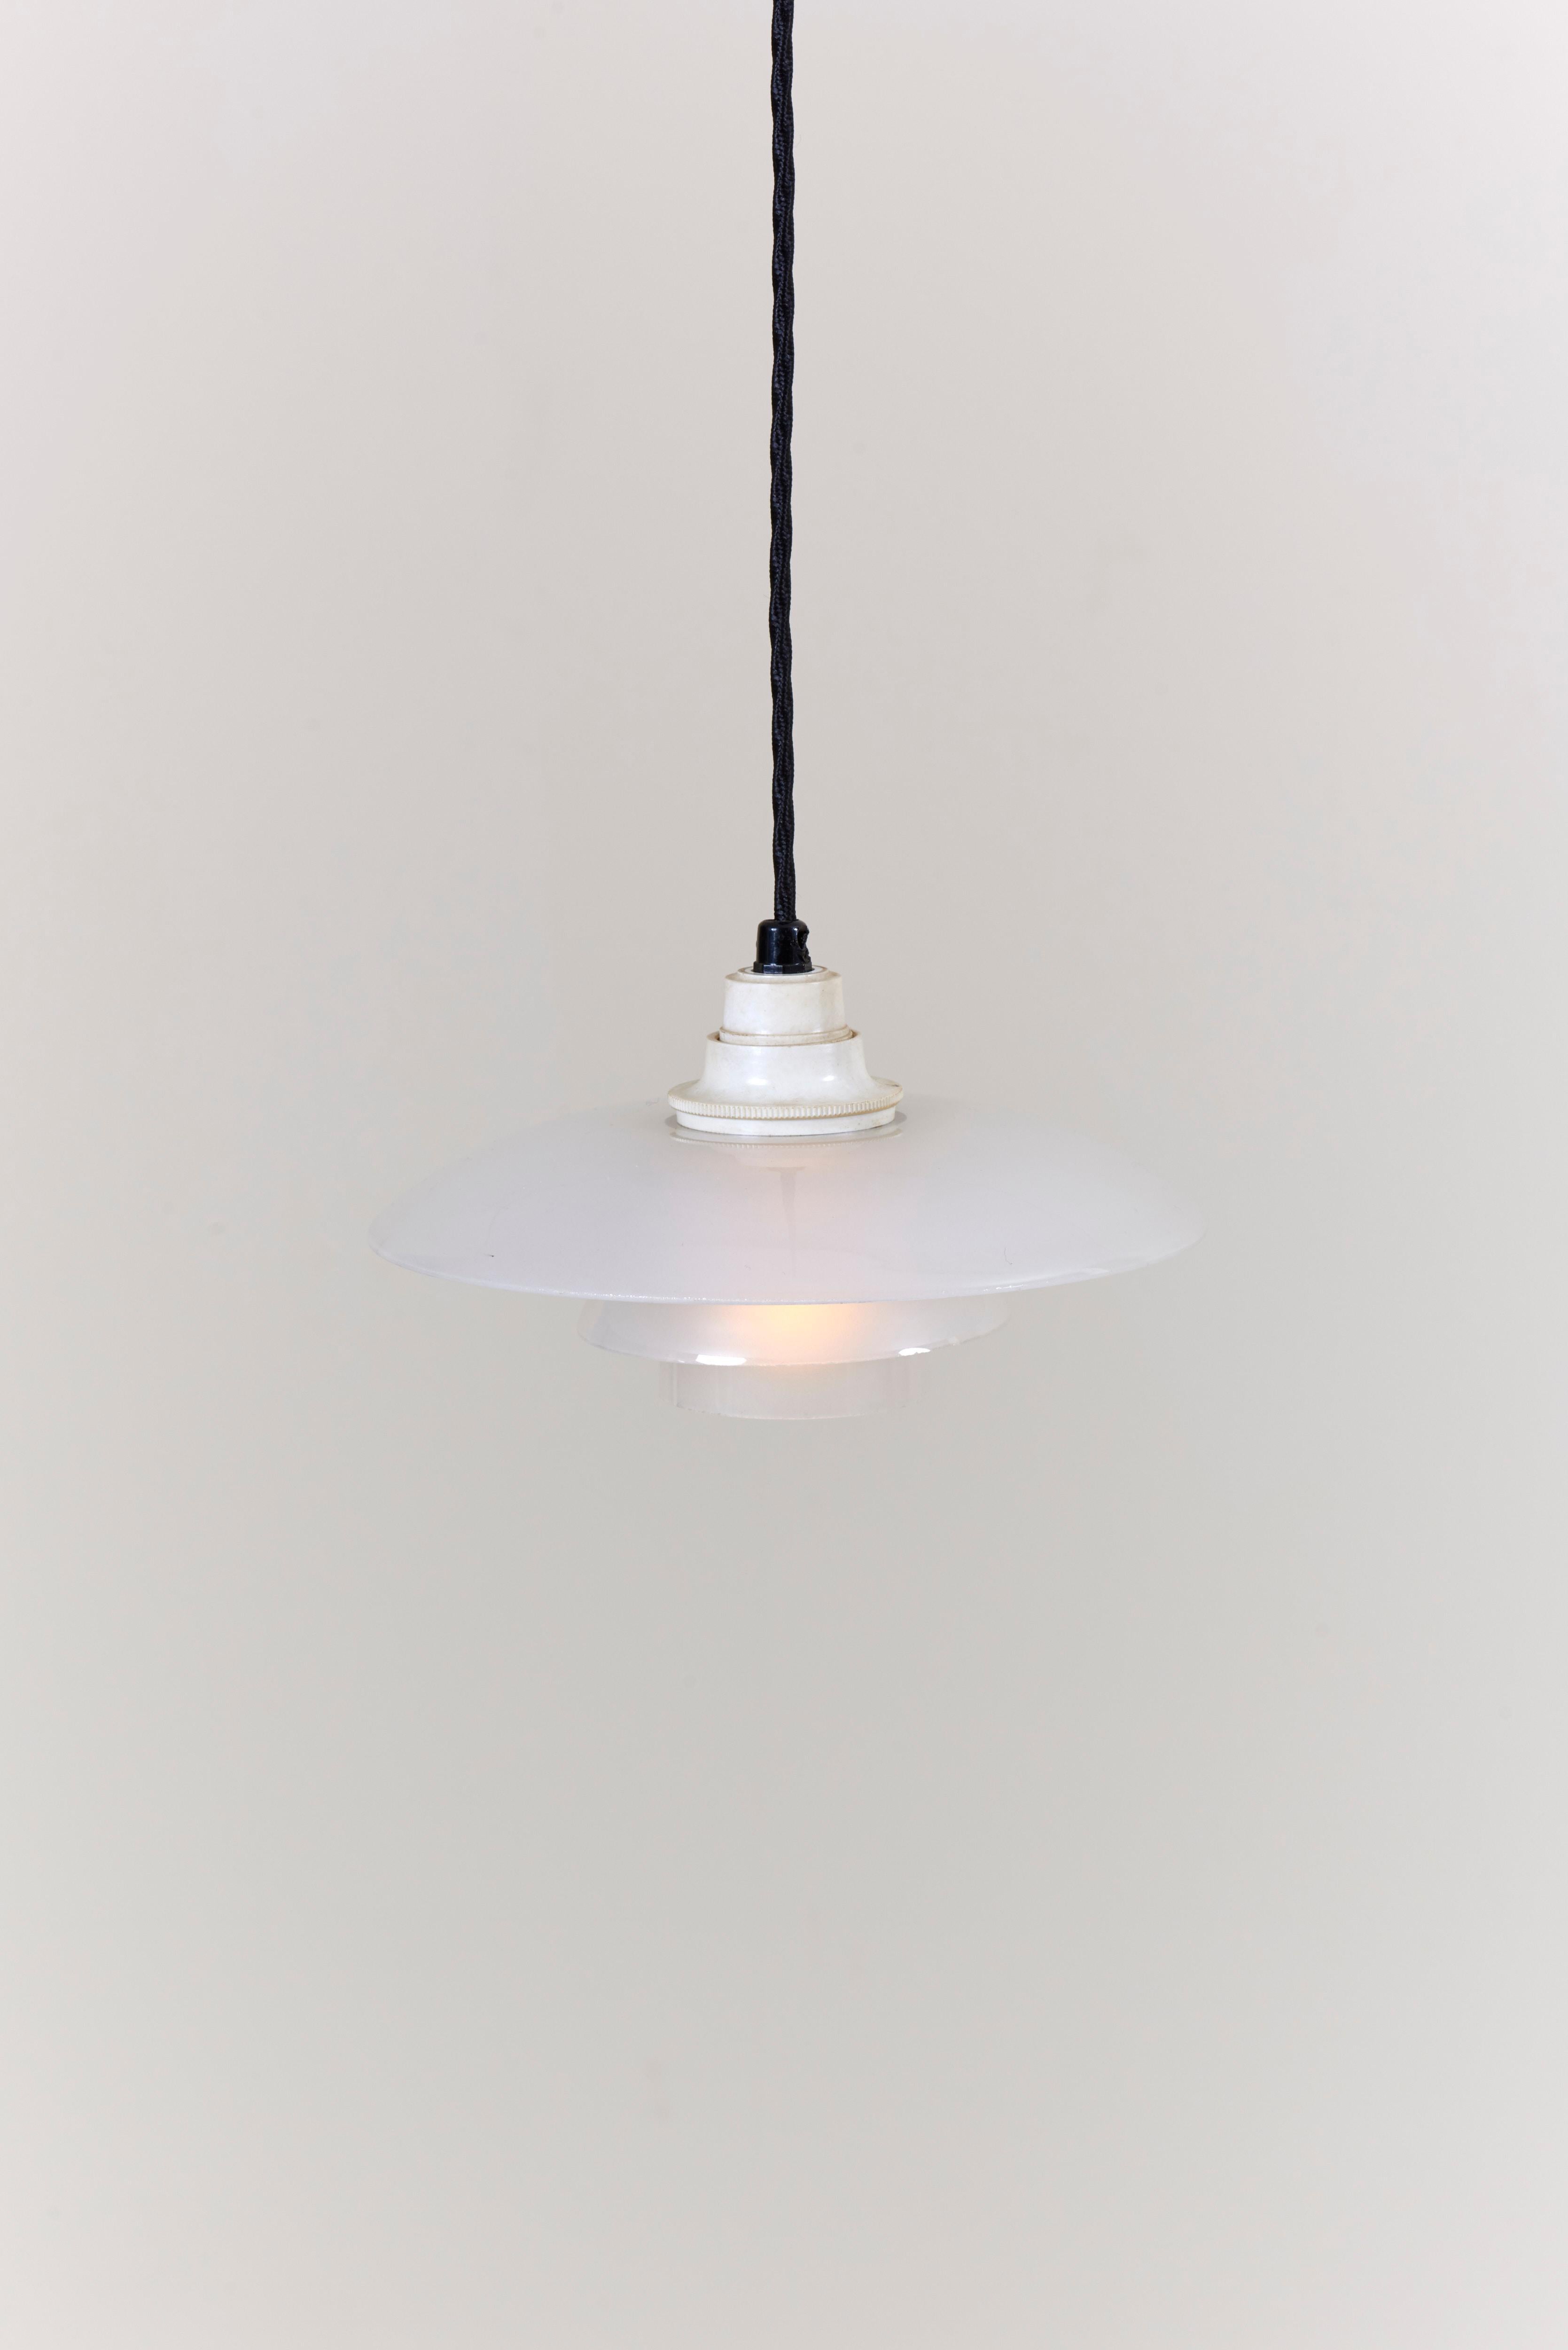 20th Century One of Two early Poul Henningsen PH 1-/1 pendant Lamps for Louis Poulsen